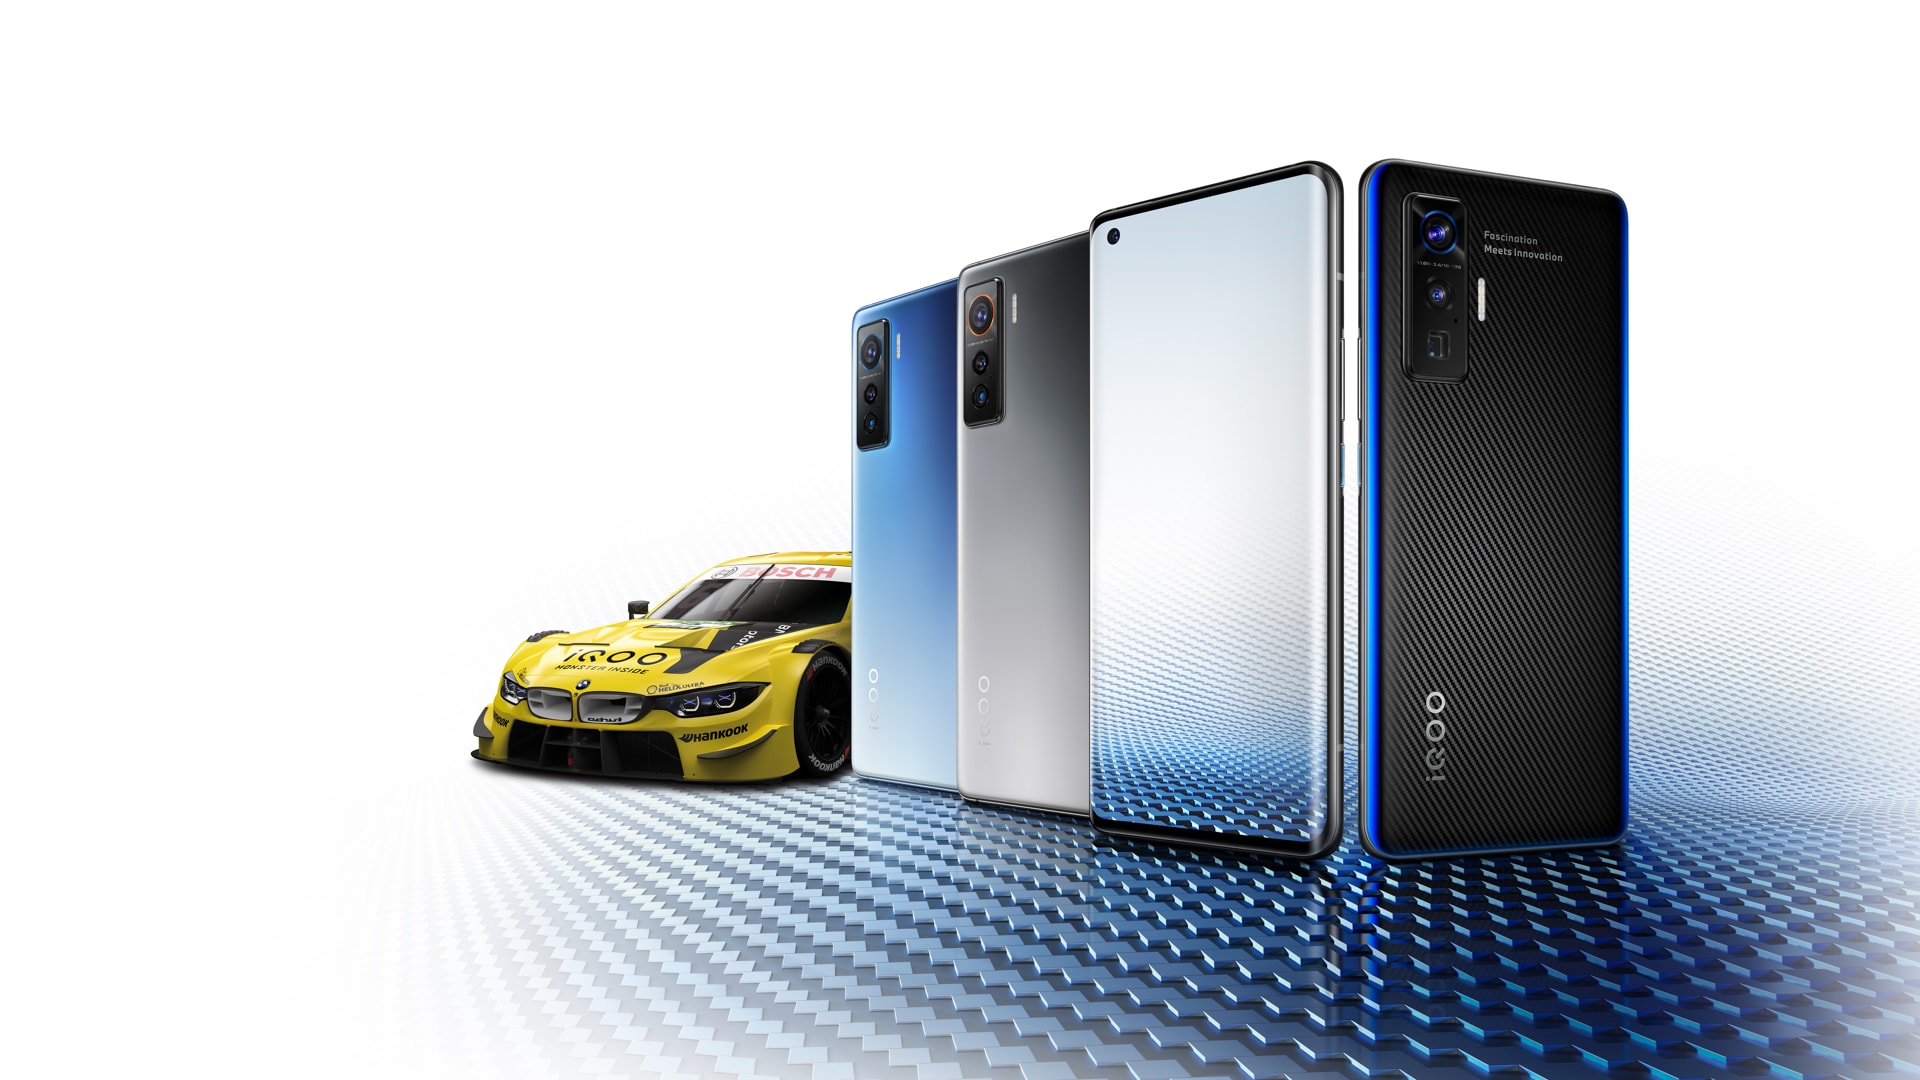 The iQOO 5 Pro is the world's latest Snapdragon 865 phone with a 